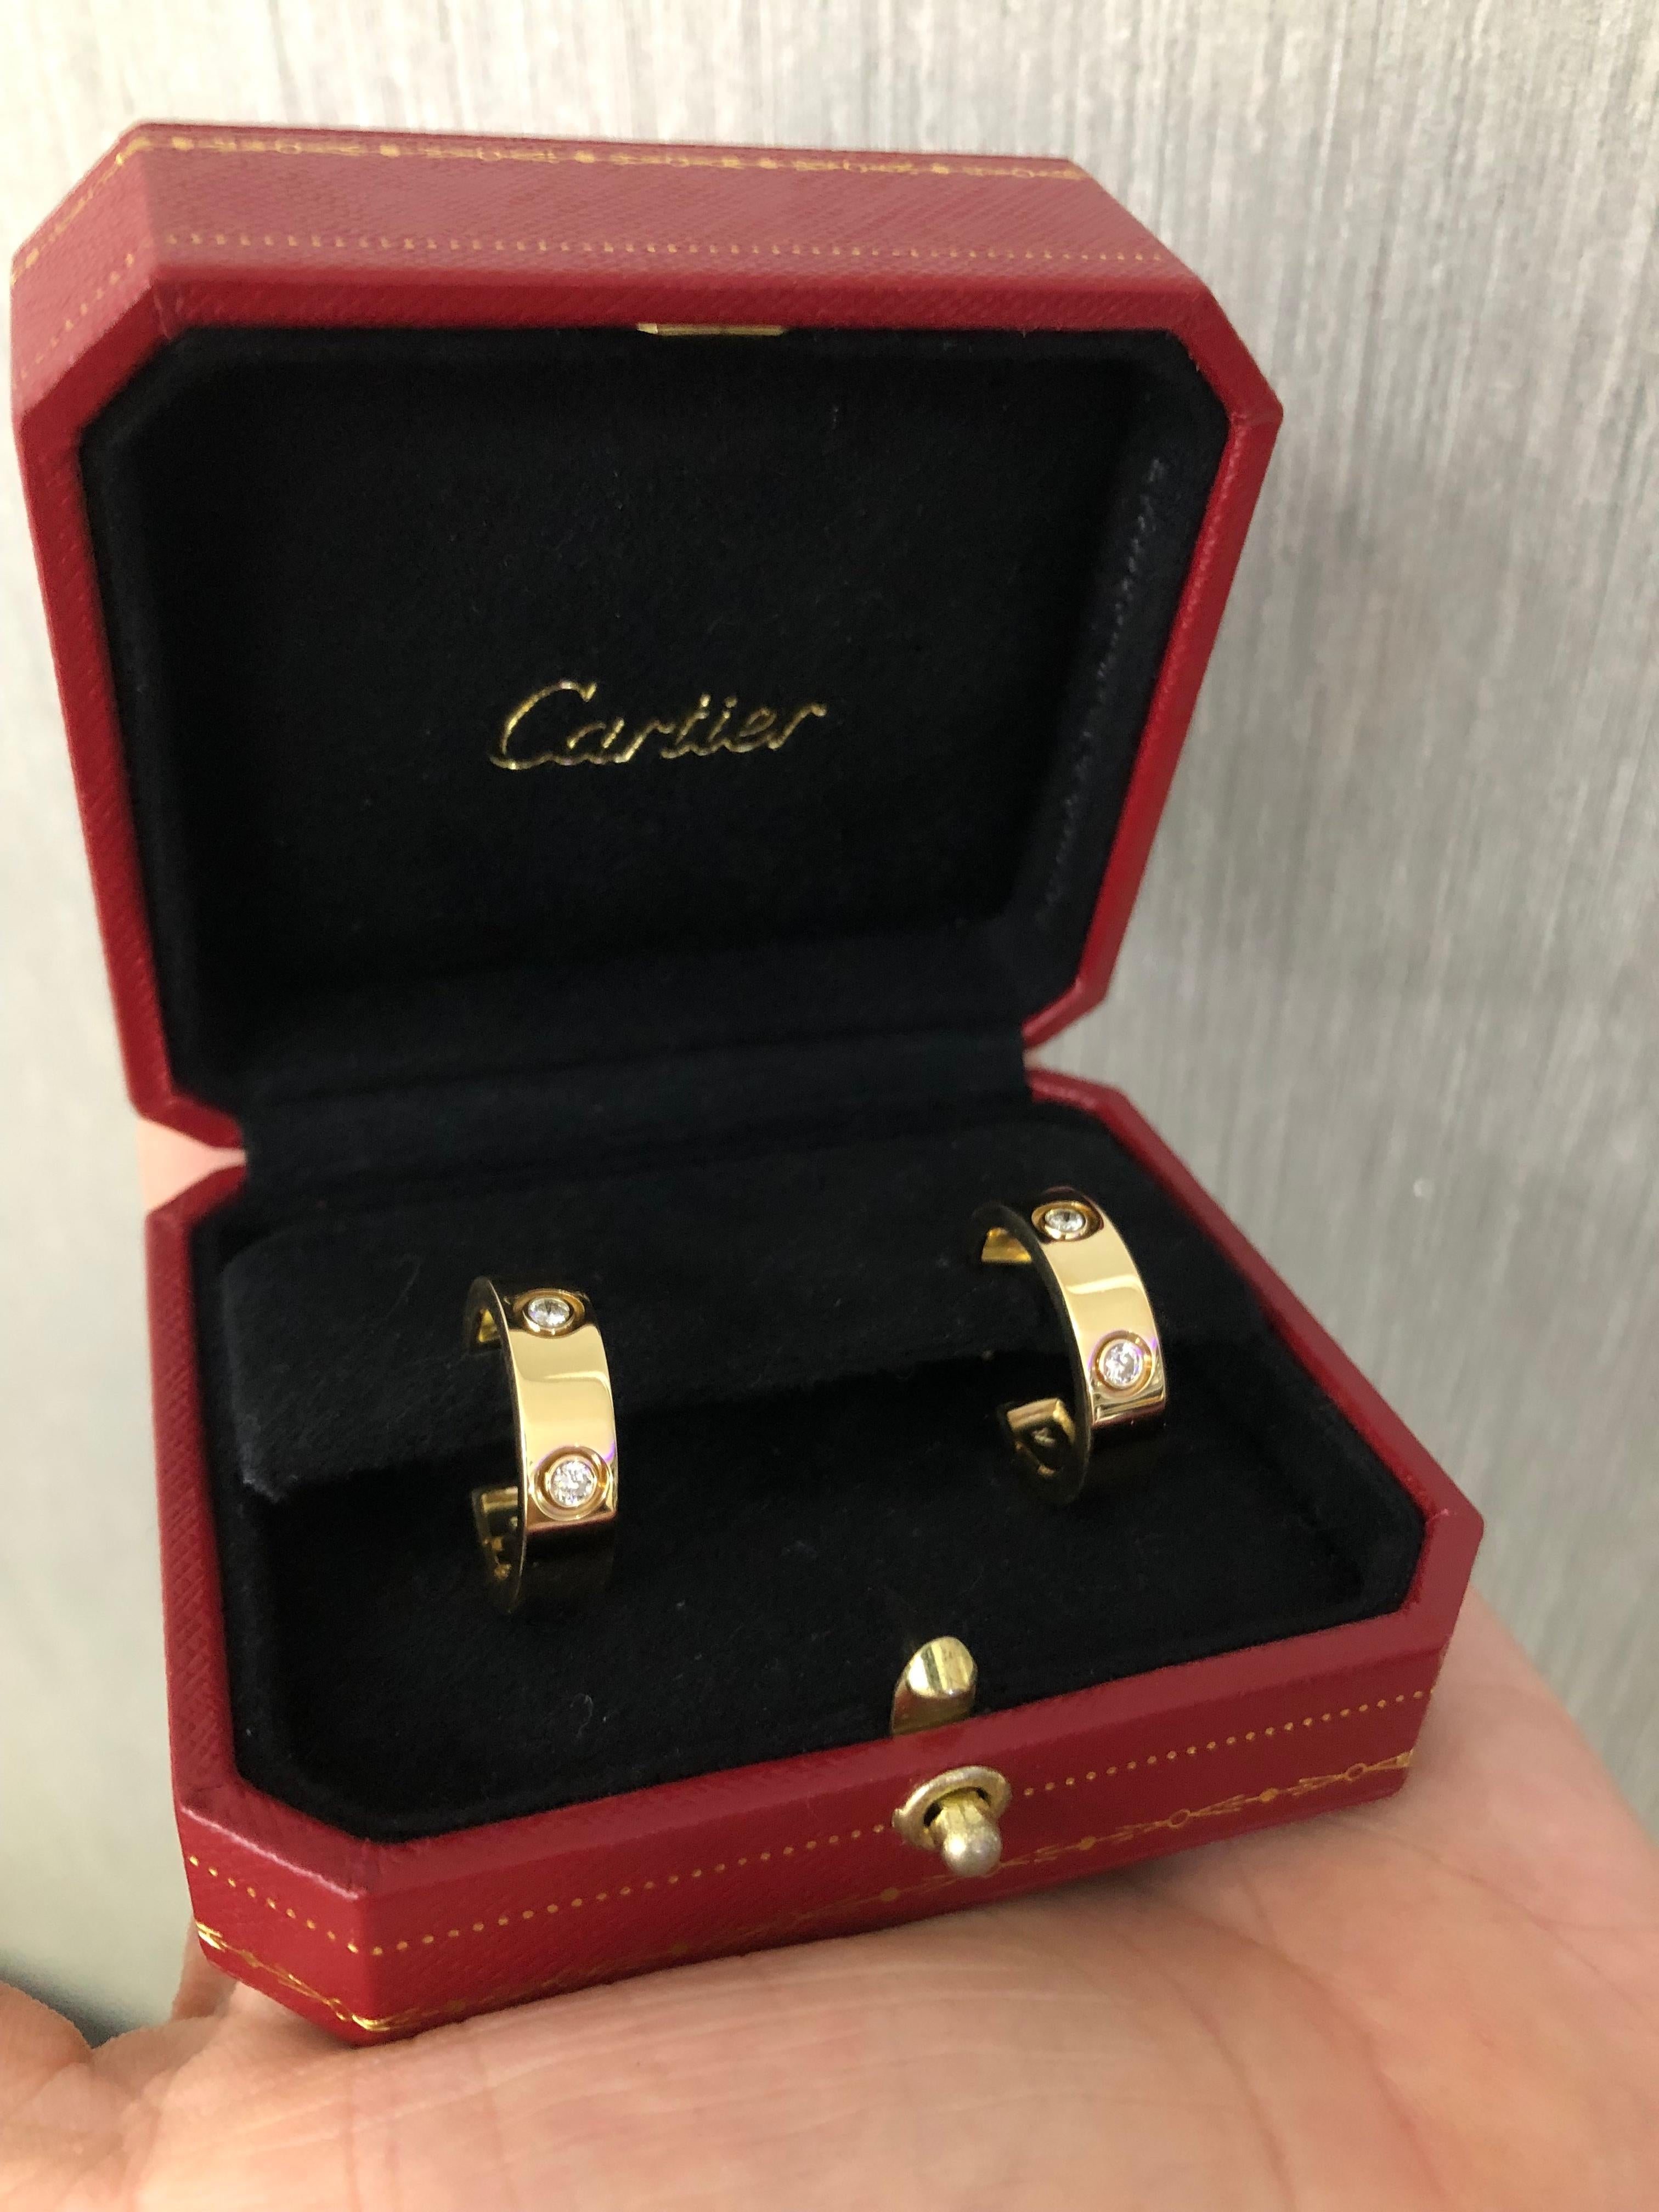 Timeless creation from famed designer Cartier. From the Love Collection these 6 Diamond hoop earrings are crafted in solid 18k yellow gold. The diamonds in the pair show F-G color and VVS1 clarity. The pair is set with approximately 0.72 carat of